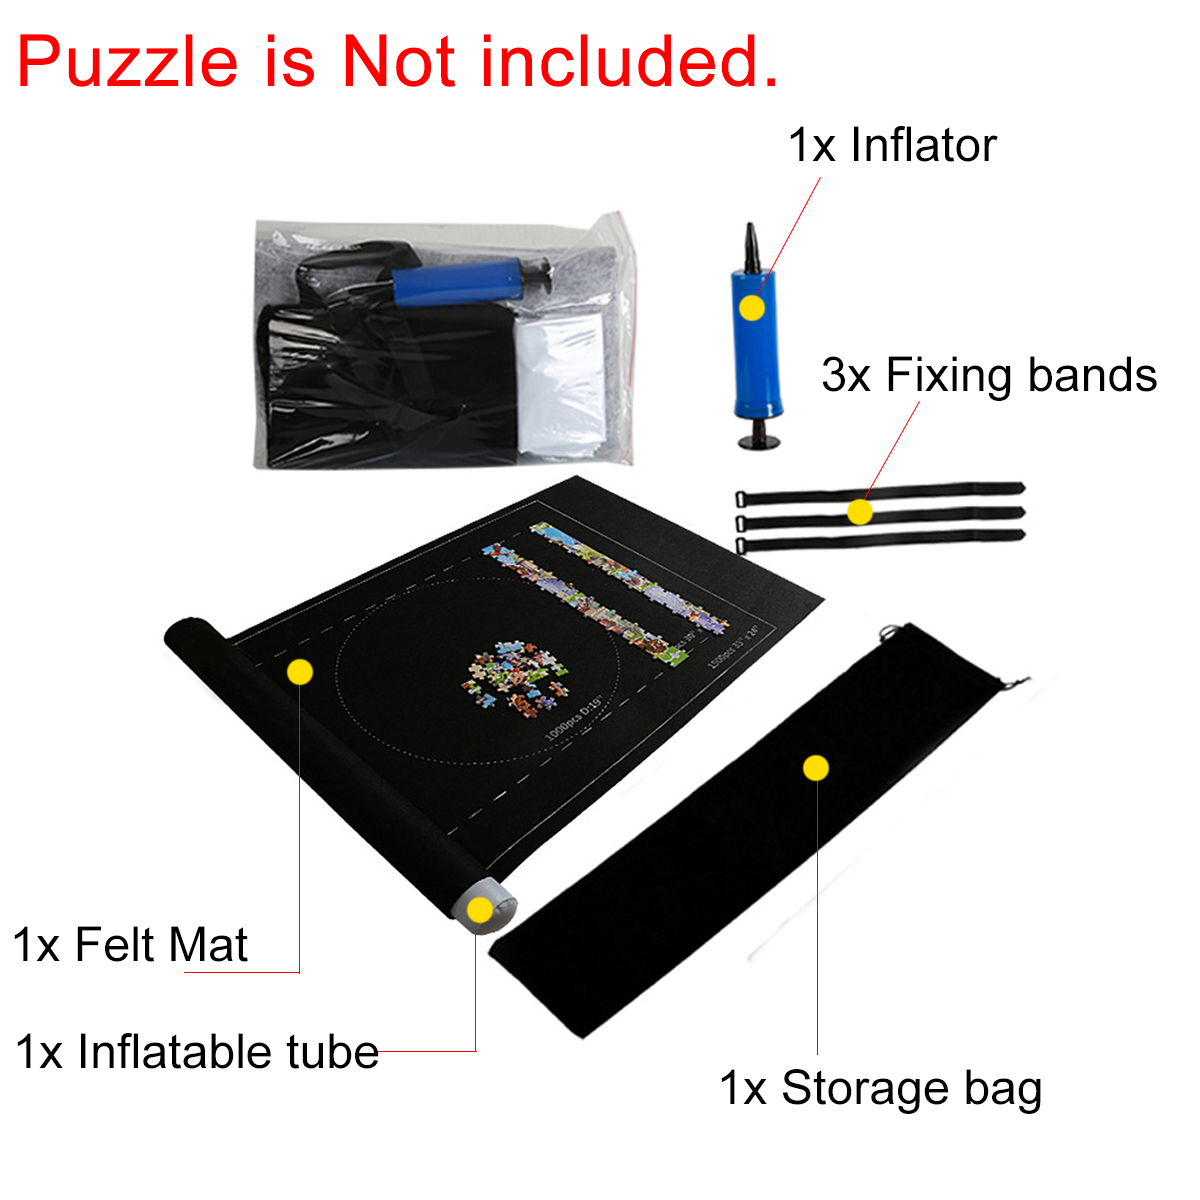 Jigsaw-Puzzle-Toy-Storage-Mat-Roll-Up-Puzzle-Felt-Storage-For-Up-To-1500-Pieces-1621339-3